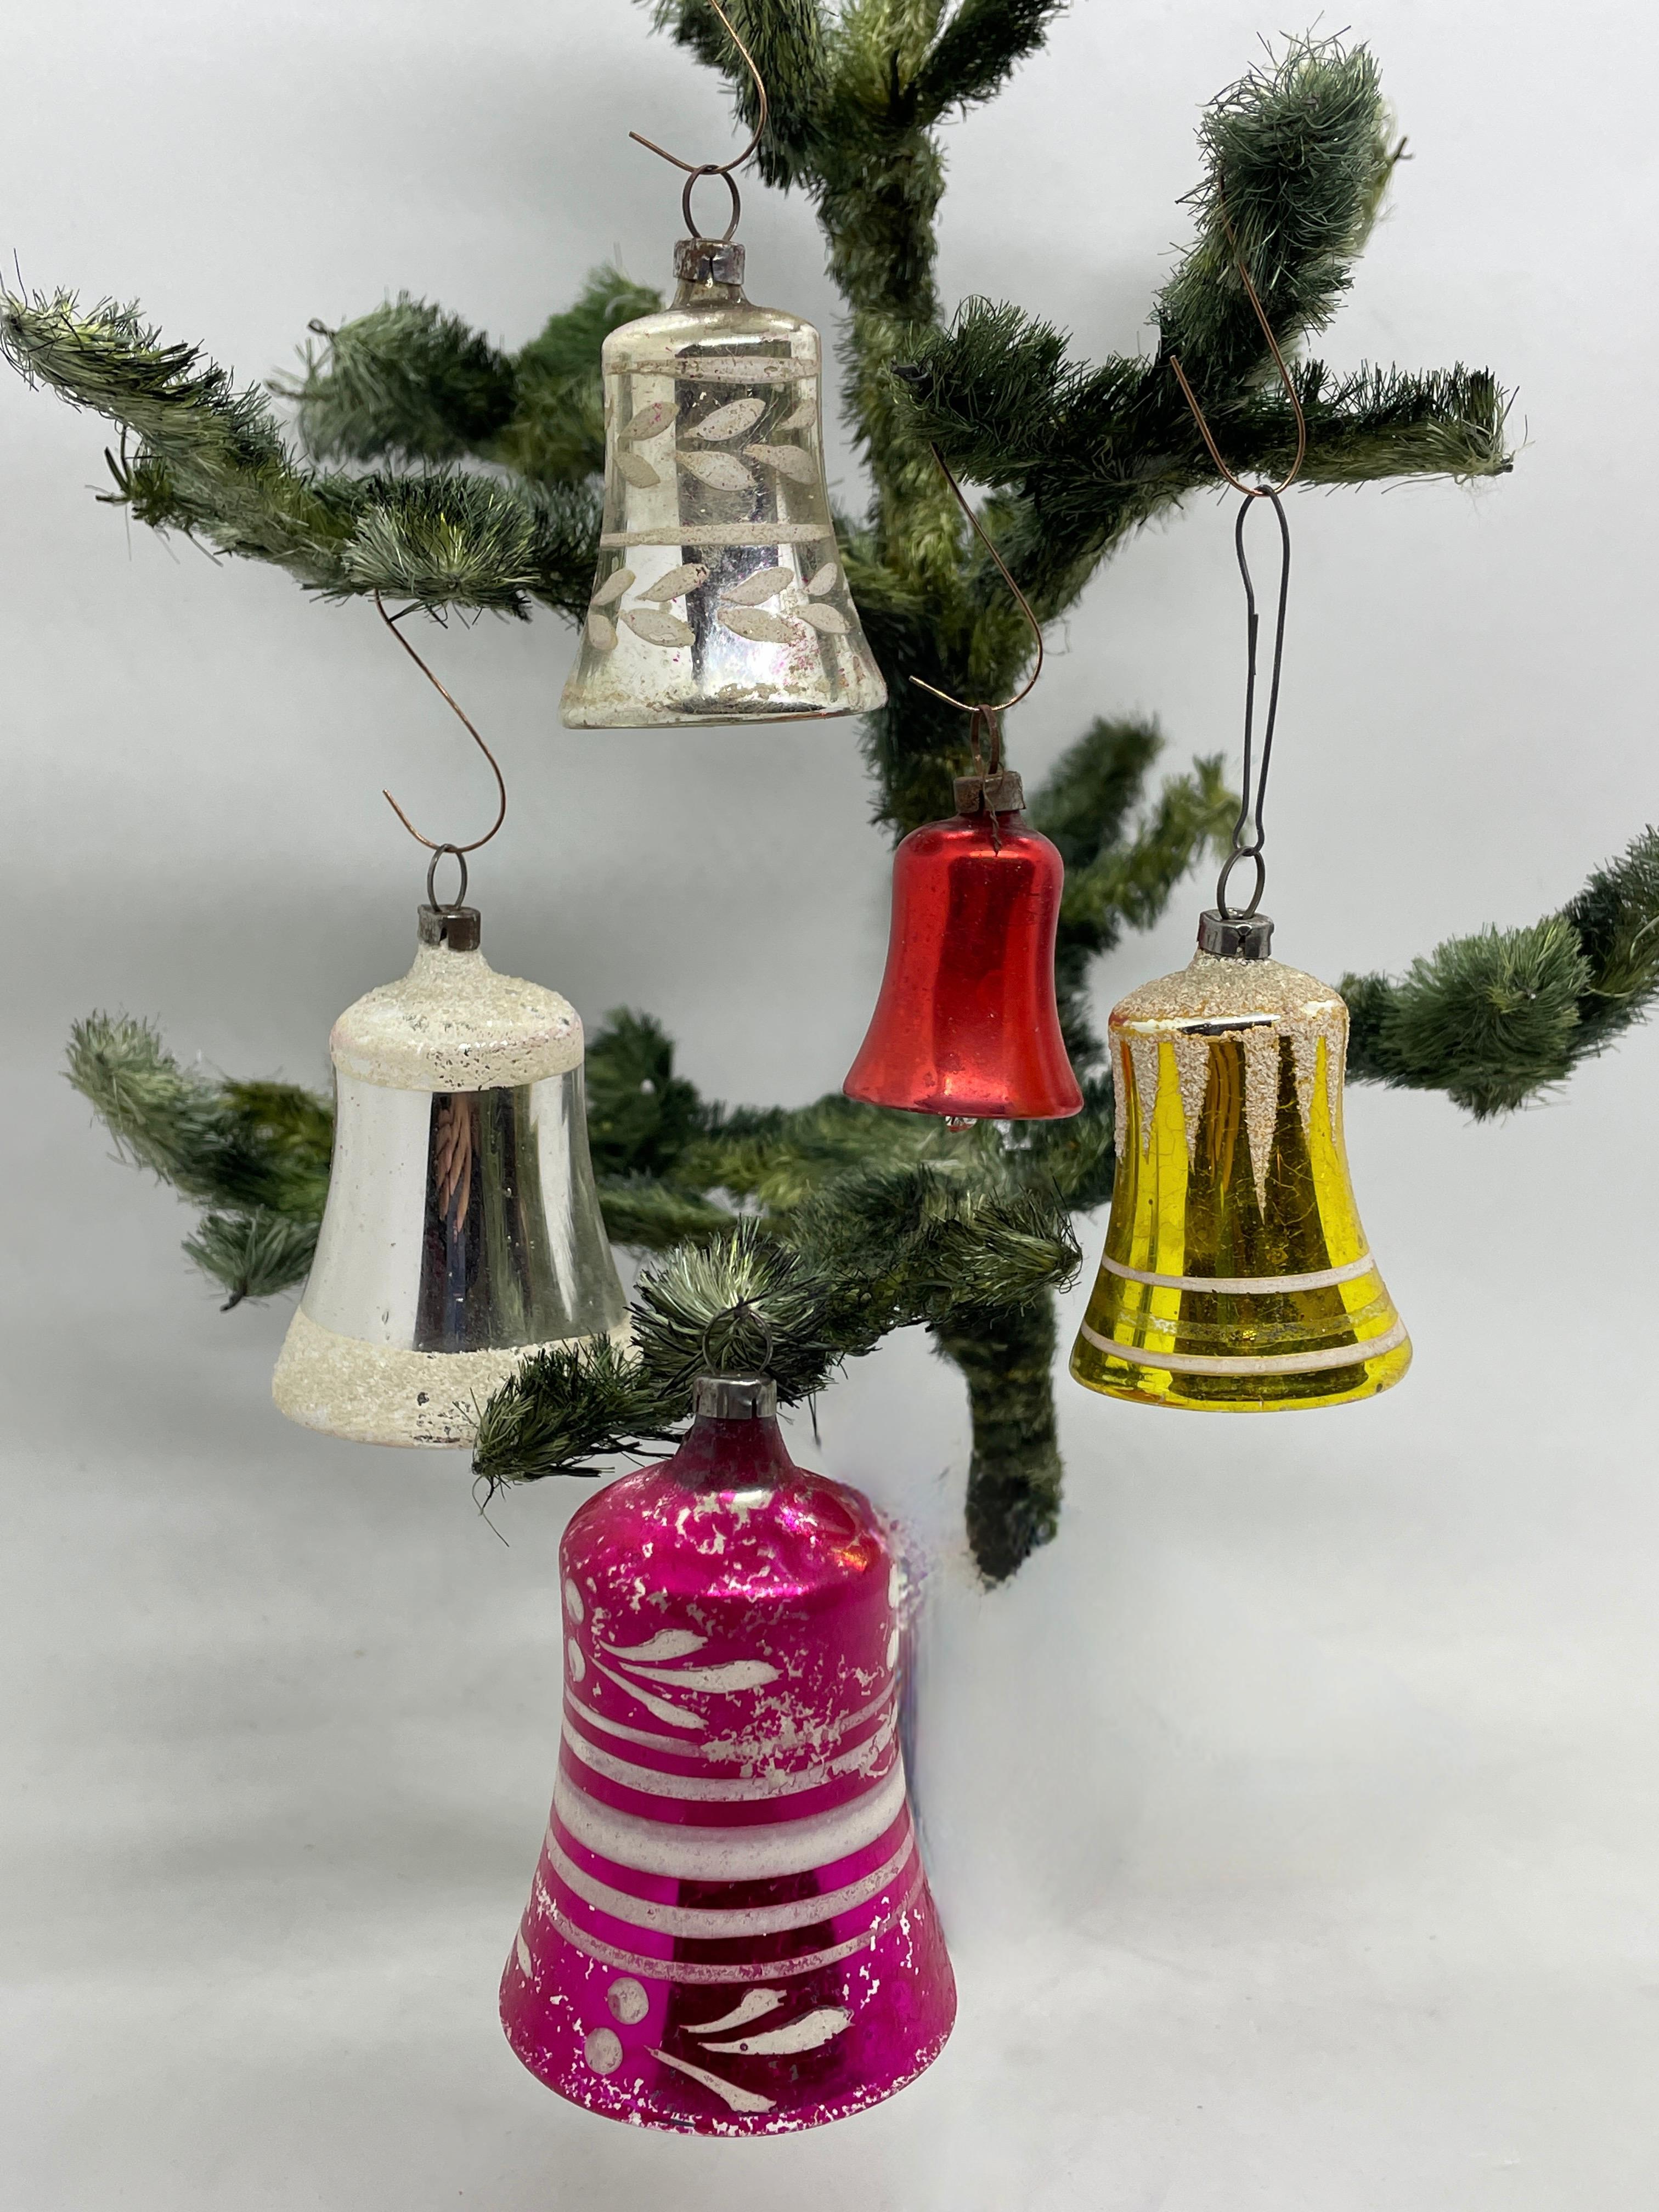 A rare Christmas ornament set off five bell glass ornaments. Each is made from thin mouth blown glass, this would be a great antique addition for your Christmas or feather tree. Measurements given for tallest bell.